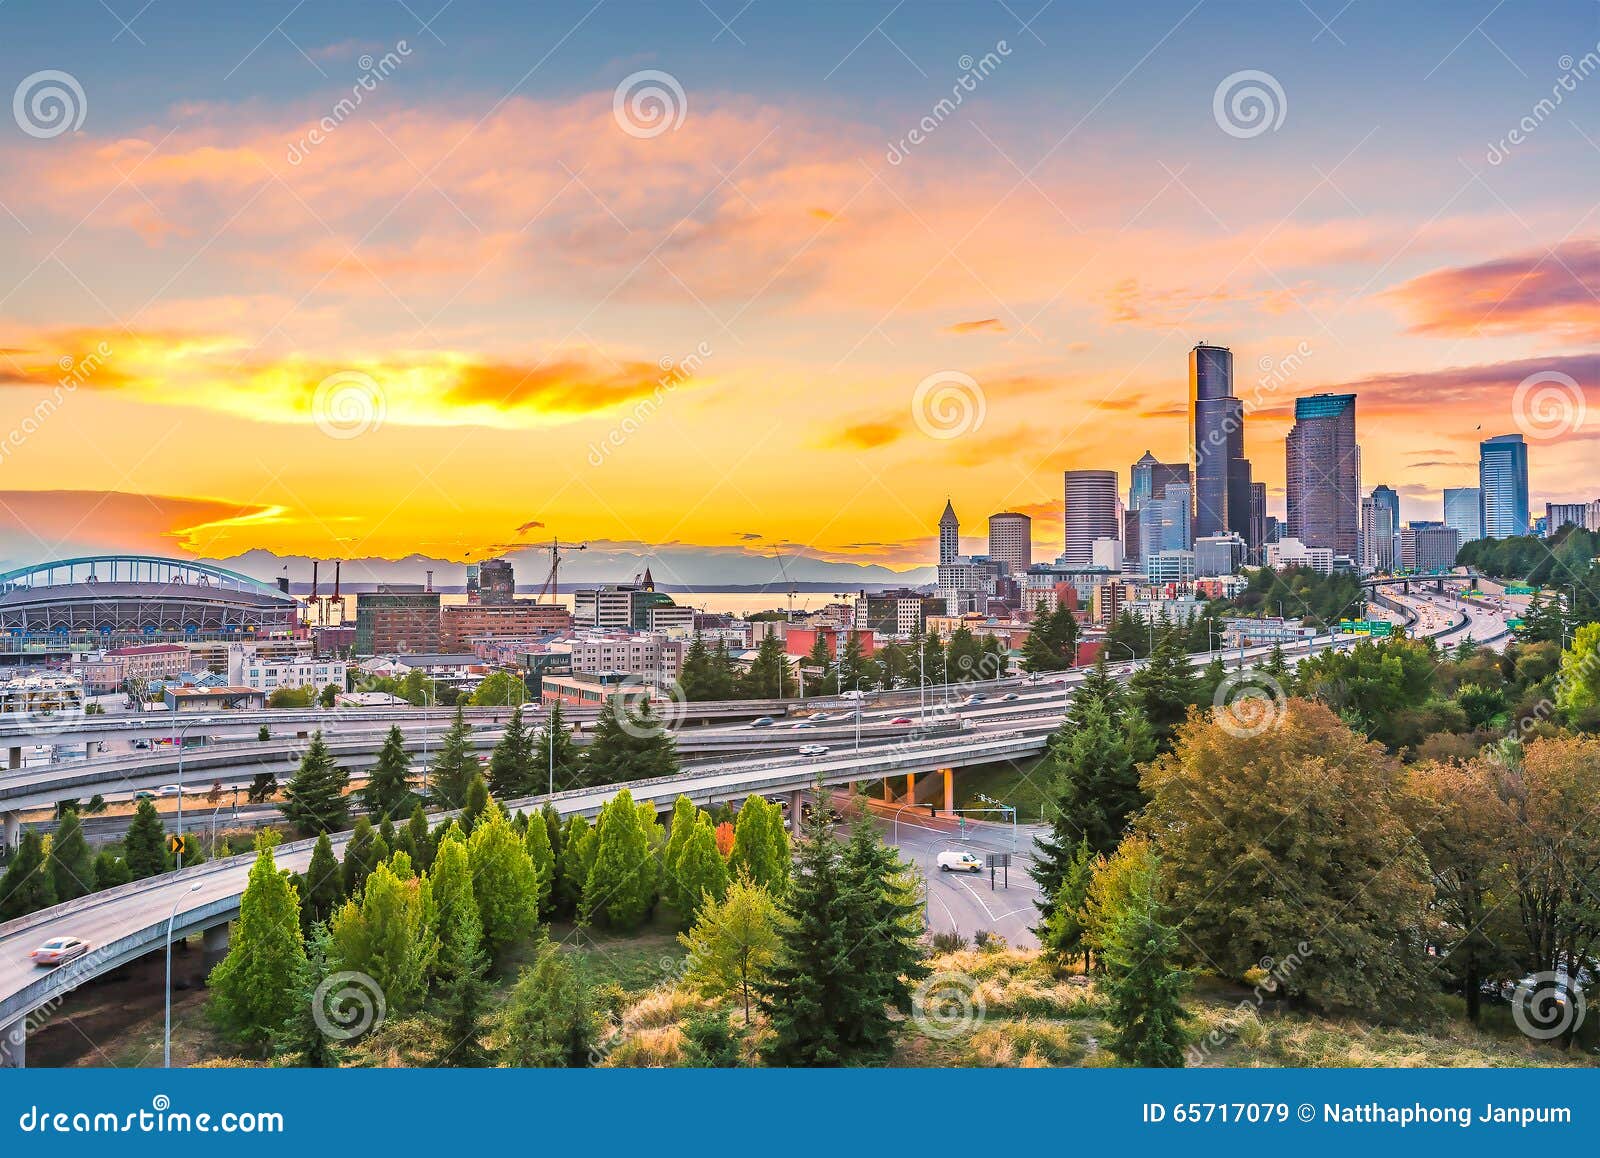 seattle skylines and interstate freeways converge with elliott bay and the waterfront background of in sunset time, seattle, washi